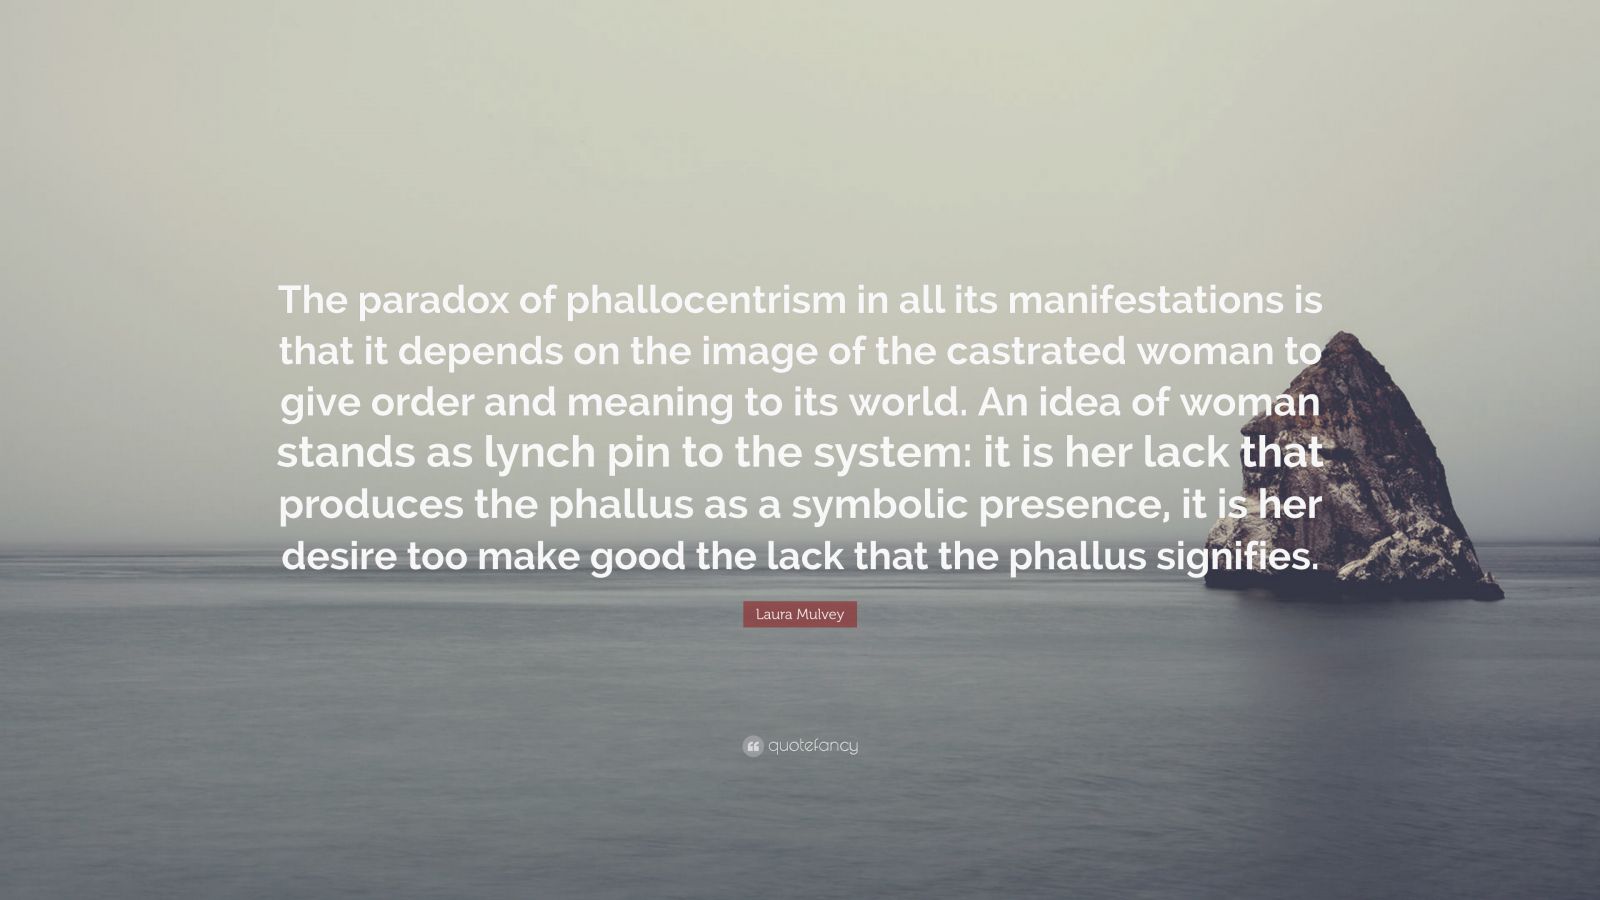 Laura Mulvey Quote: “The paradox of phallocentrism in all its